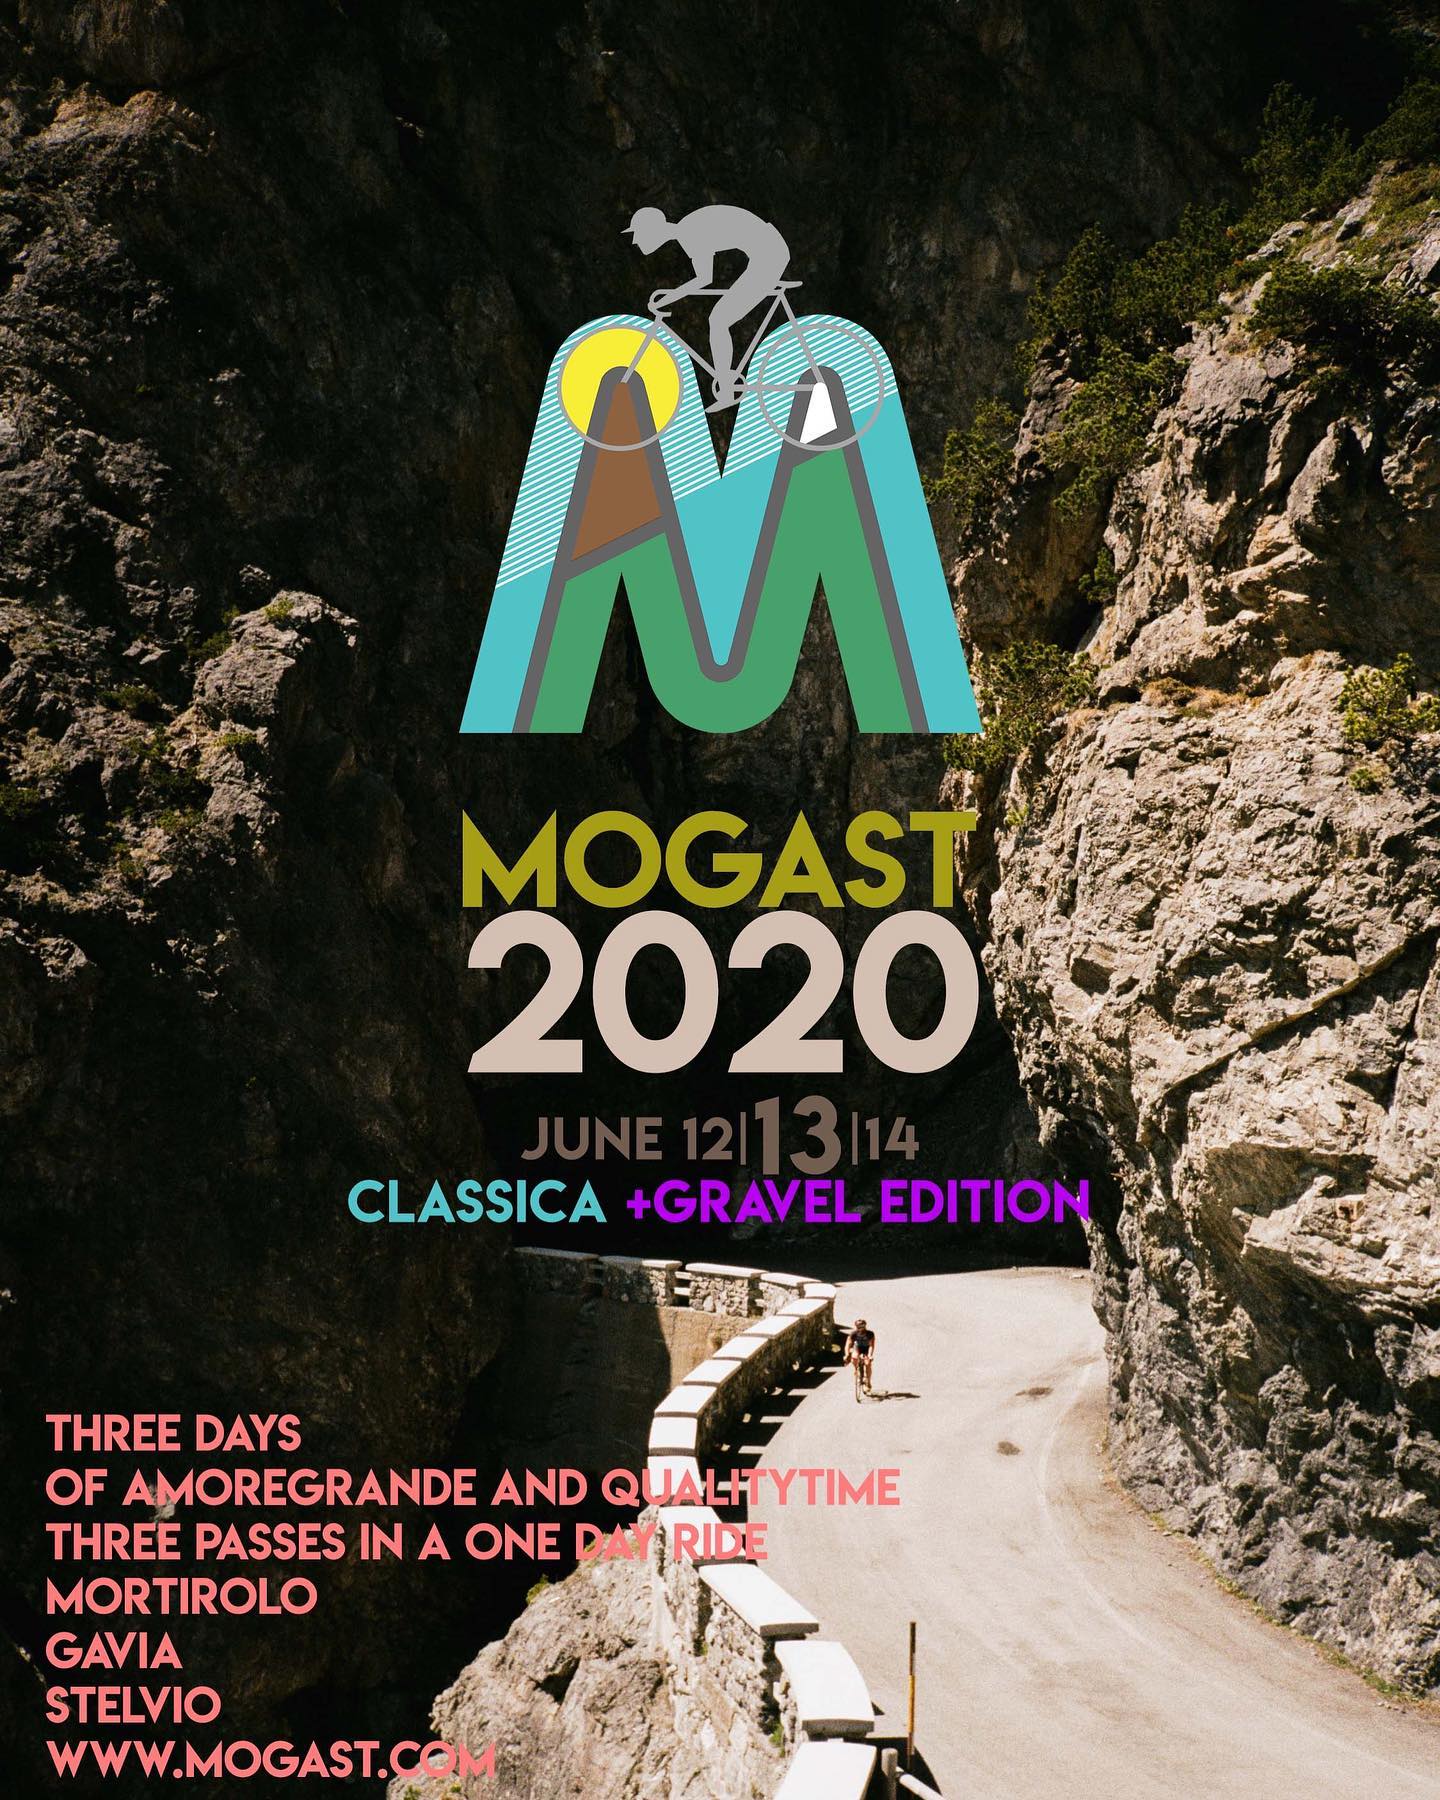 On Cupid’s wings flies the #Mogast2020 subscription opening
•
2020 brings more choiches and even more #amoregrande™️ and #qualitytime™️
•
Check what’s new at www.mogast.com
•
#subscribenow
#limitededition
#mogast2020
#maybegraveledition
#amoregrande™️
#gravelgrande™️
#qualitytime™️
#mortirolo #gavia #stelvio
#threepassesonedayride •
📸 maestro @stefanhaehnel